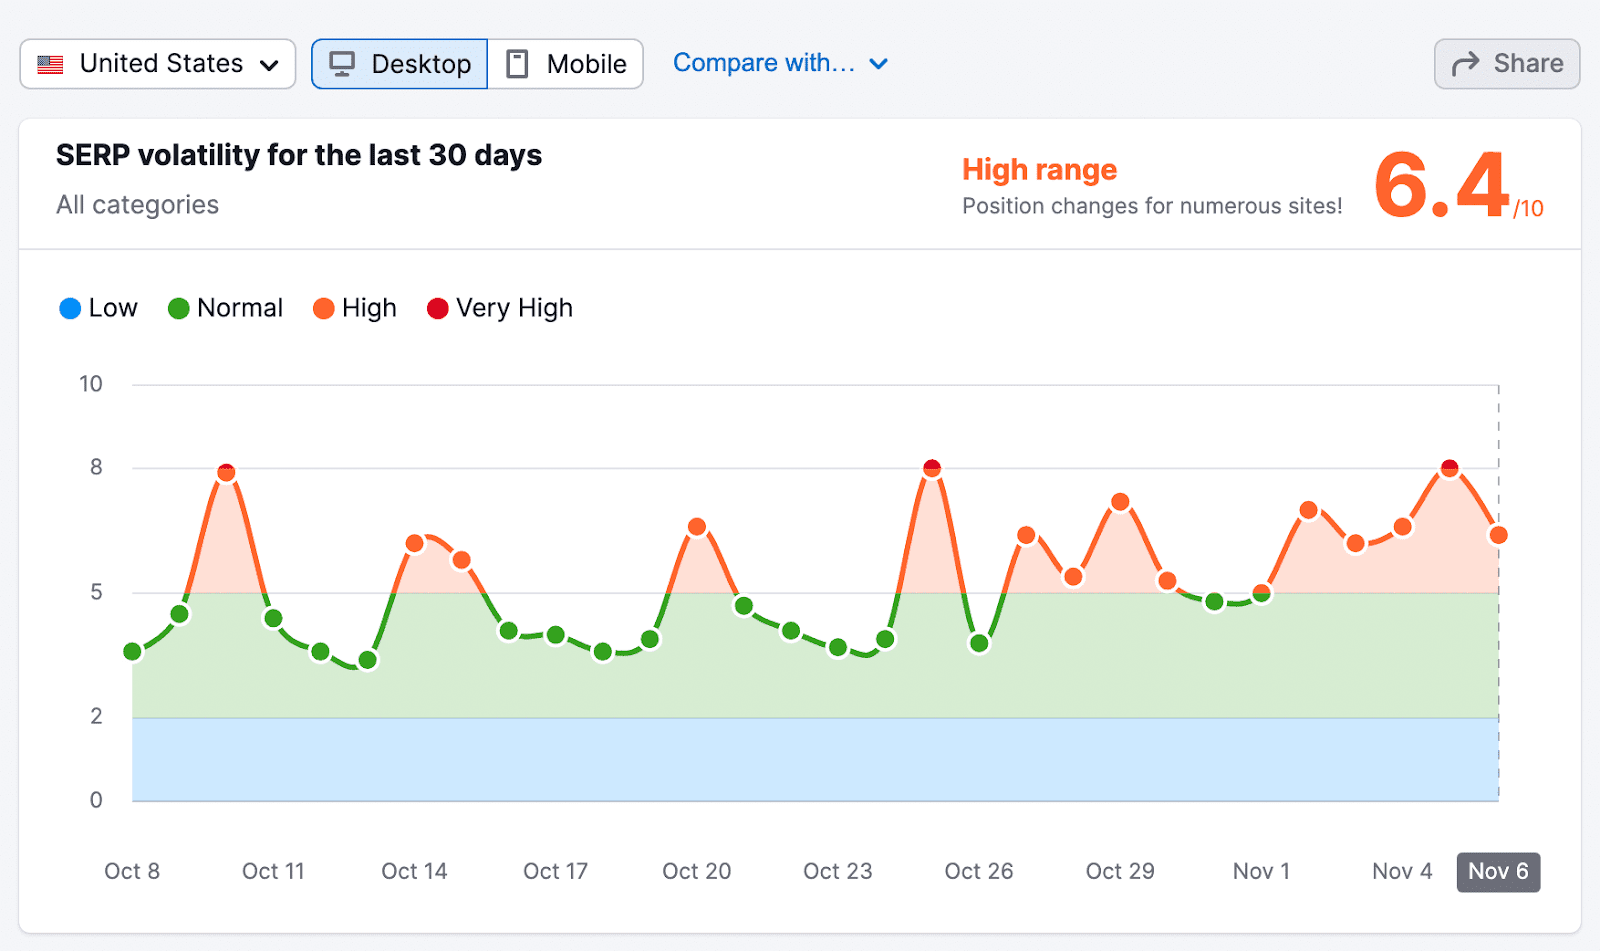 “SERP volatility for the last 30 days" graph